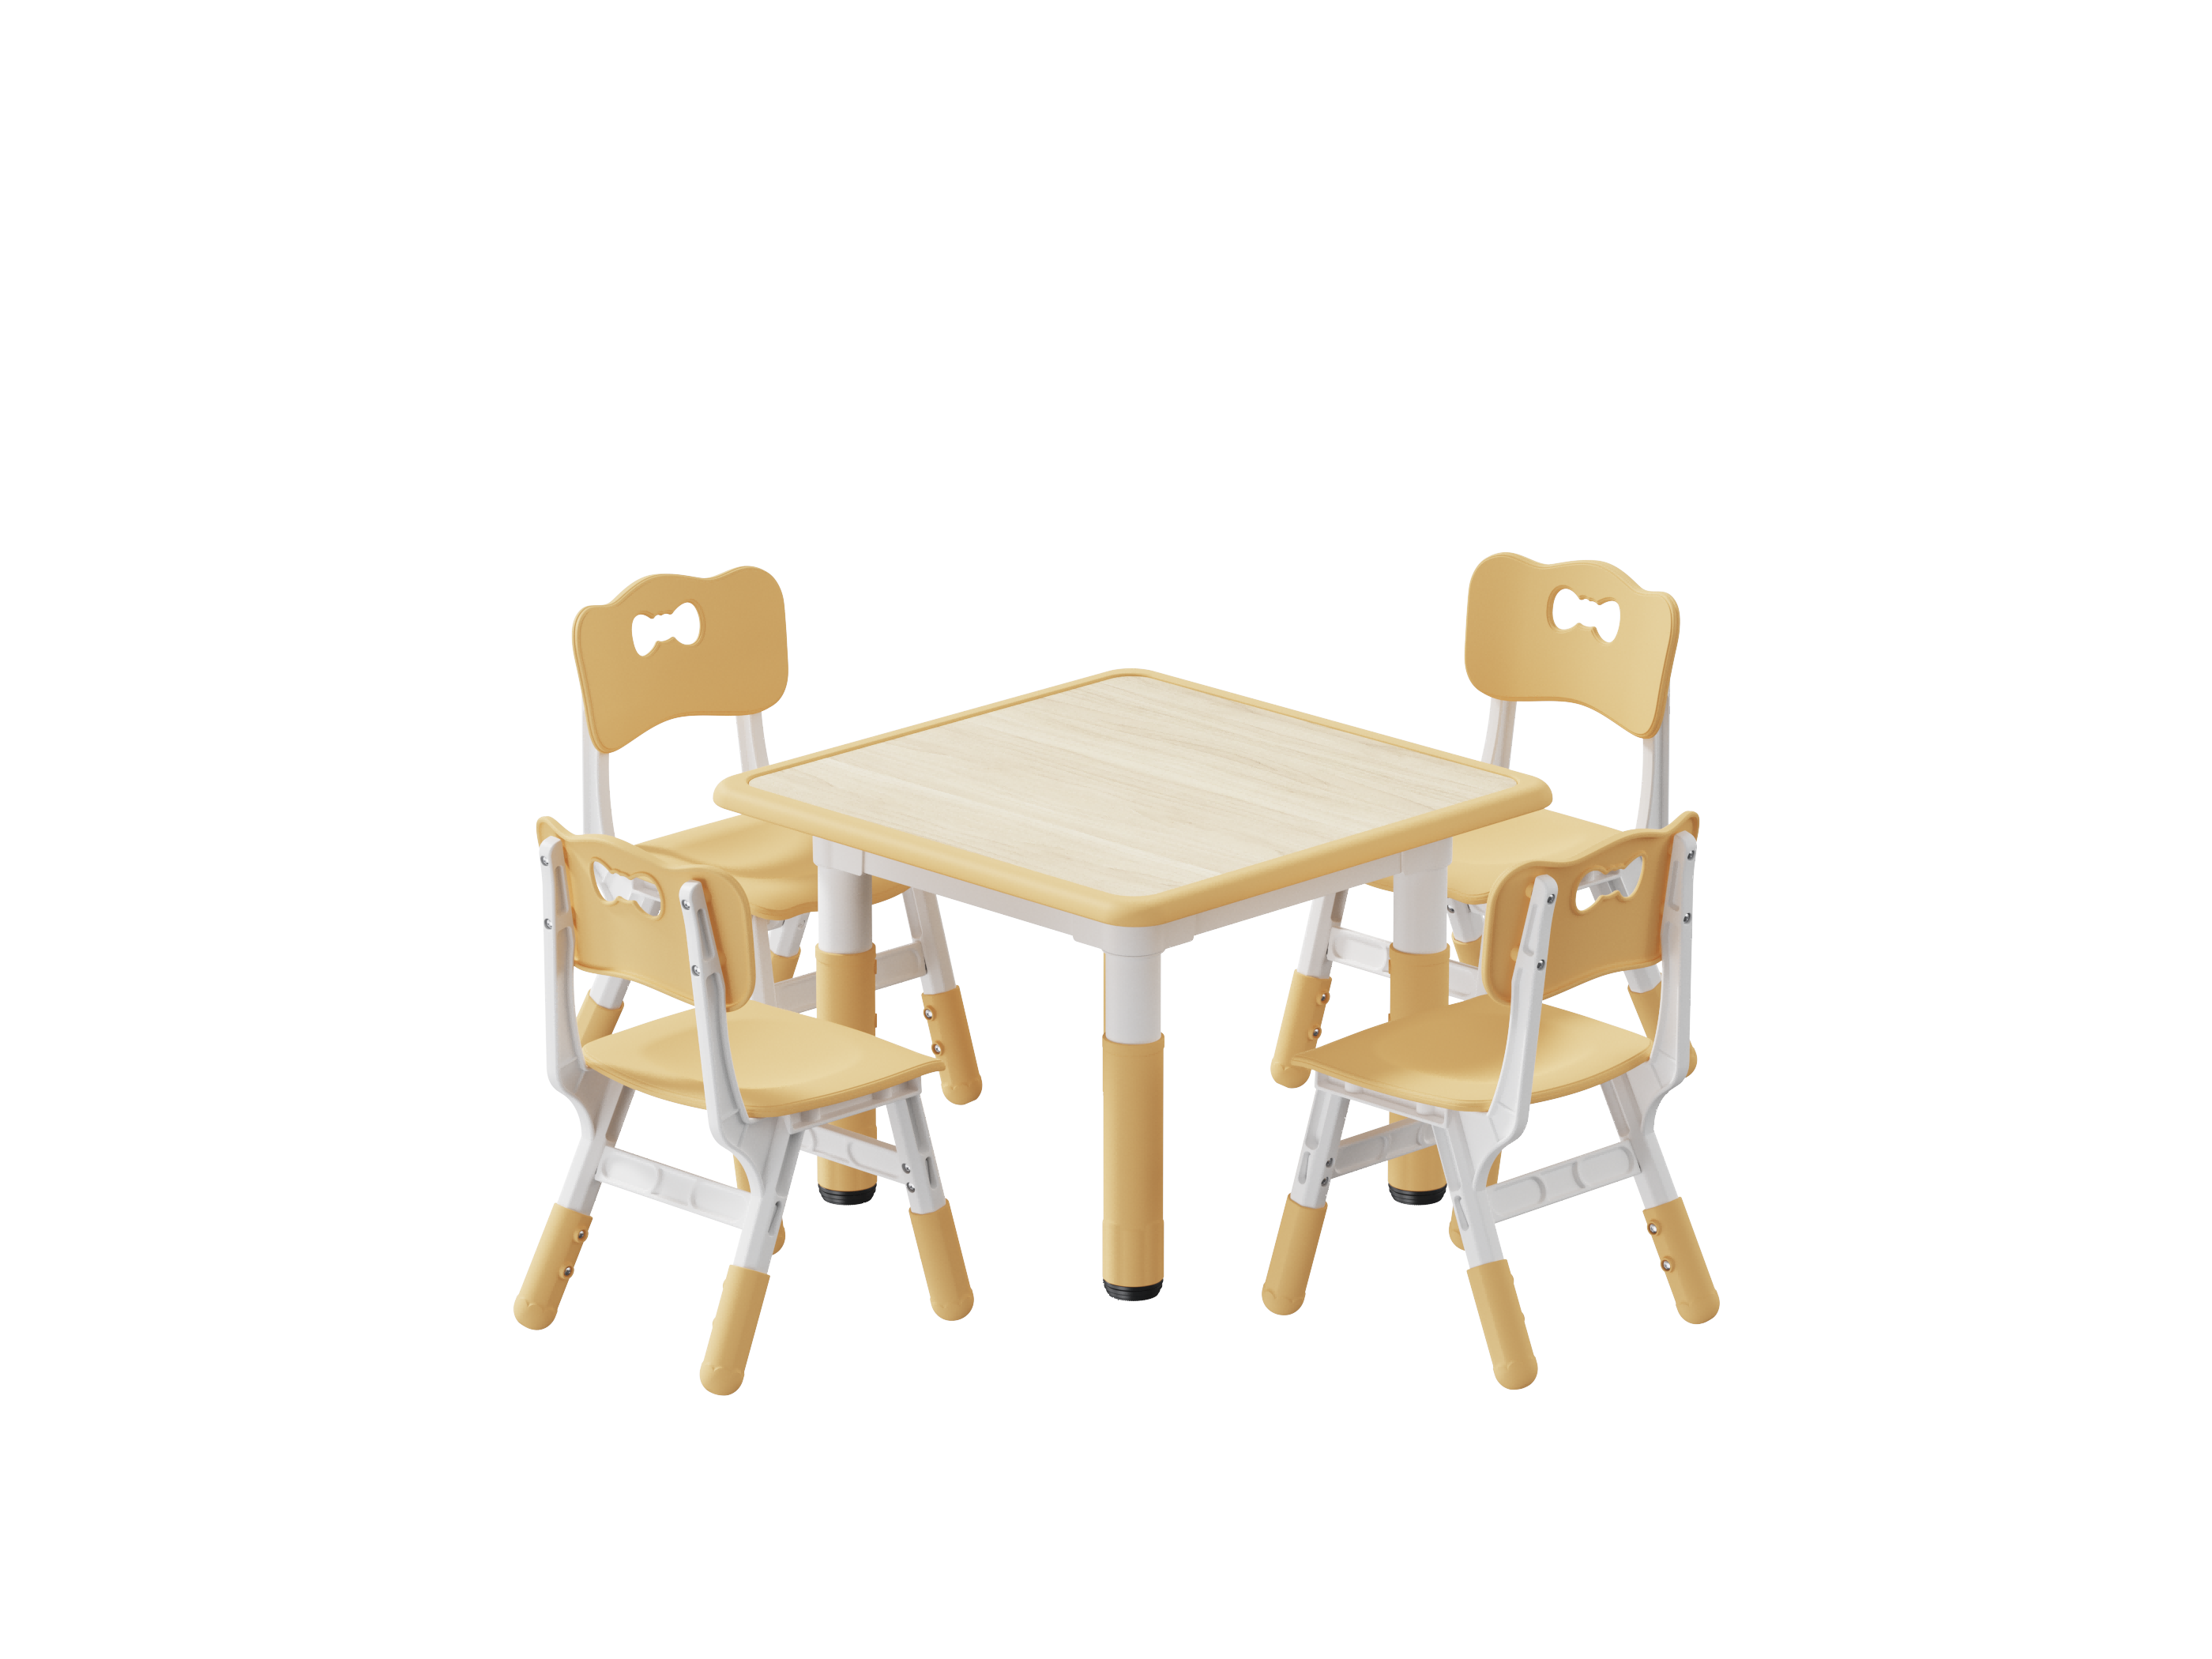 Brelley Kids Table and Chairs Set Beige, Height Adjustable, Suit for Ages 2-10, Wooden Finish, Size: 47.20 x 23.60 x 23.60